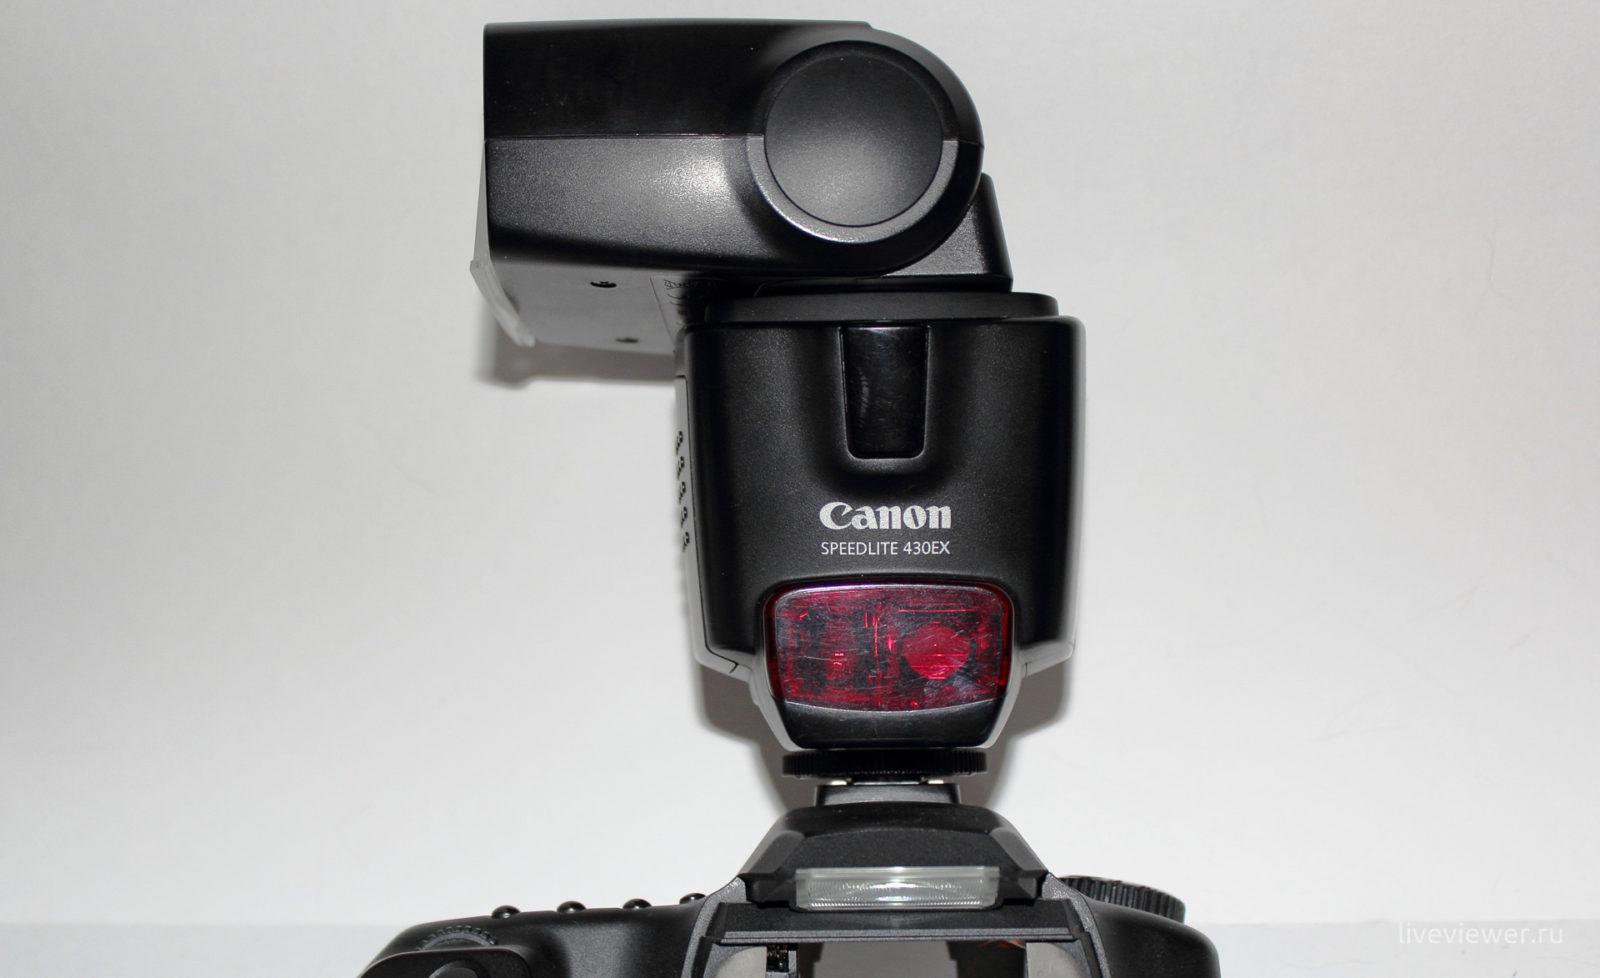 Canon 430EX. Flash type on the camera